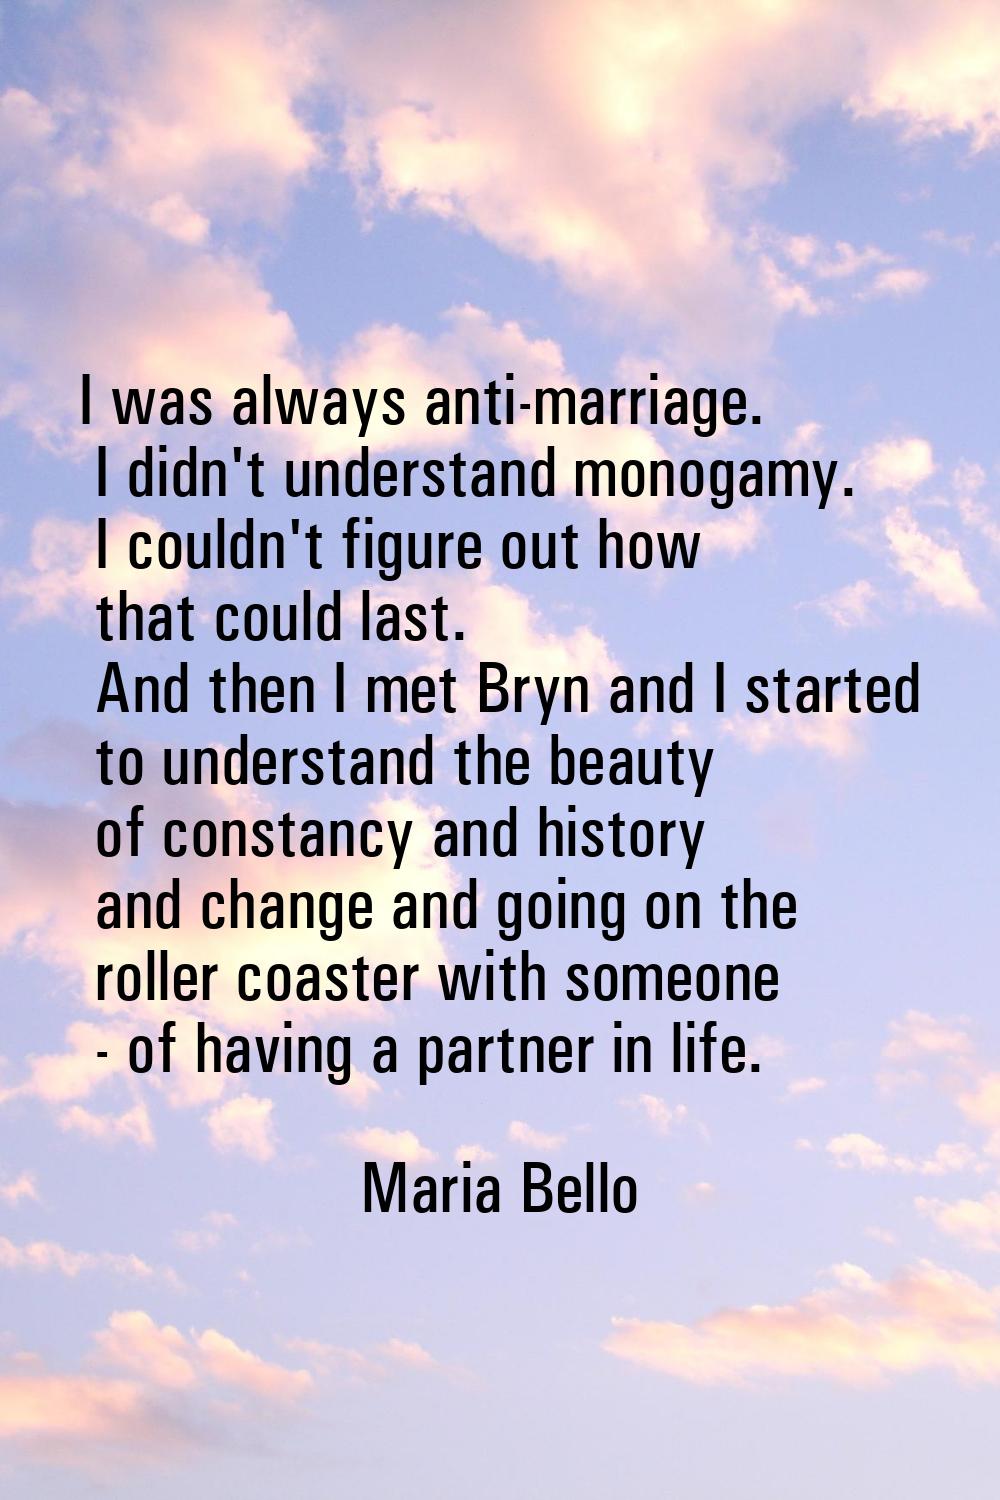 I was always anti-marriage. I didn't understand monogamy. I couldn't figure out how that could last